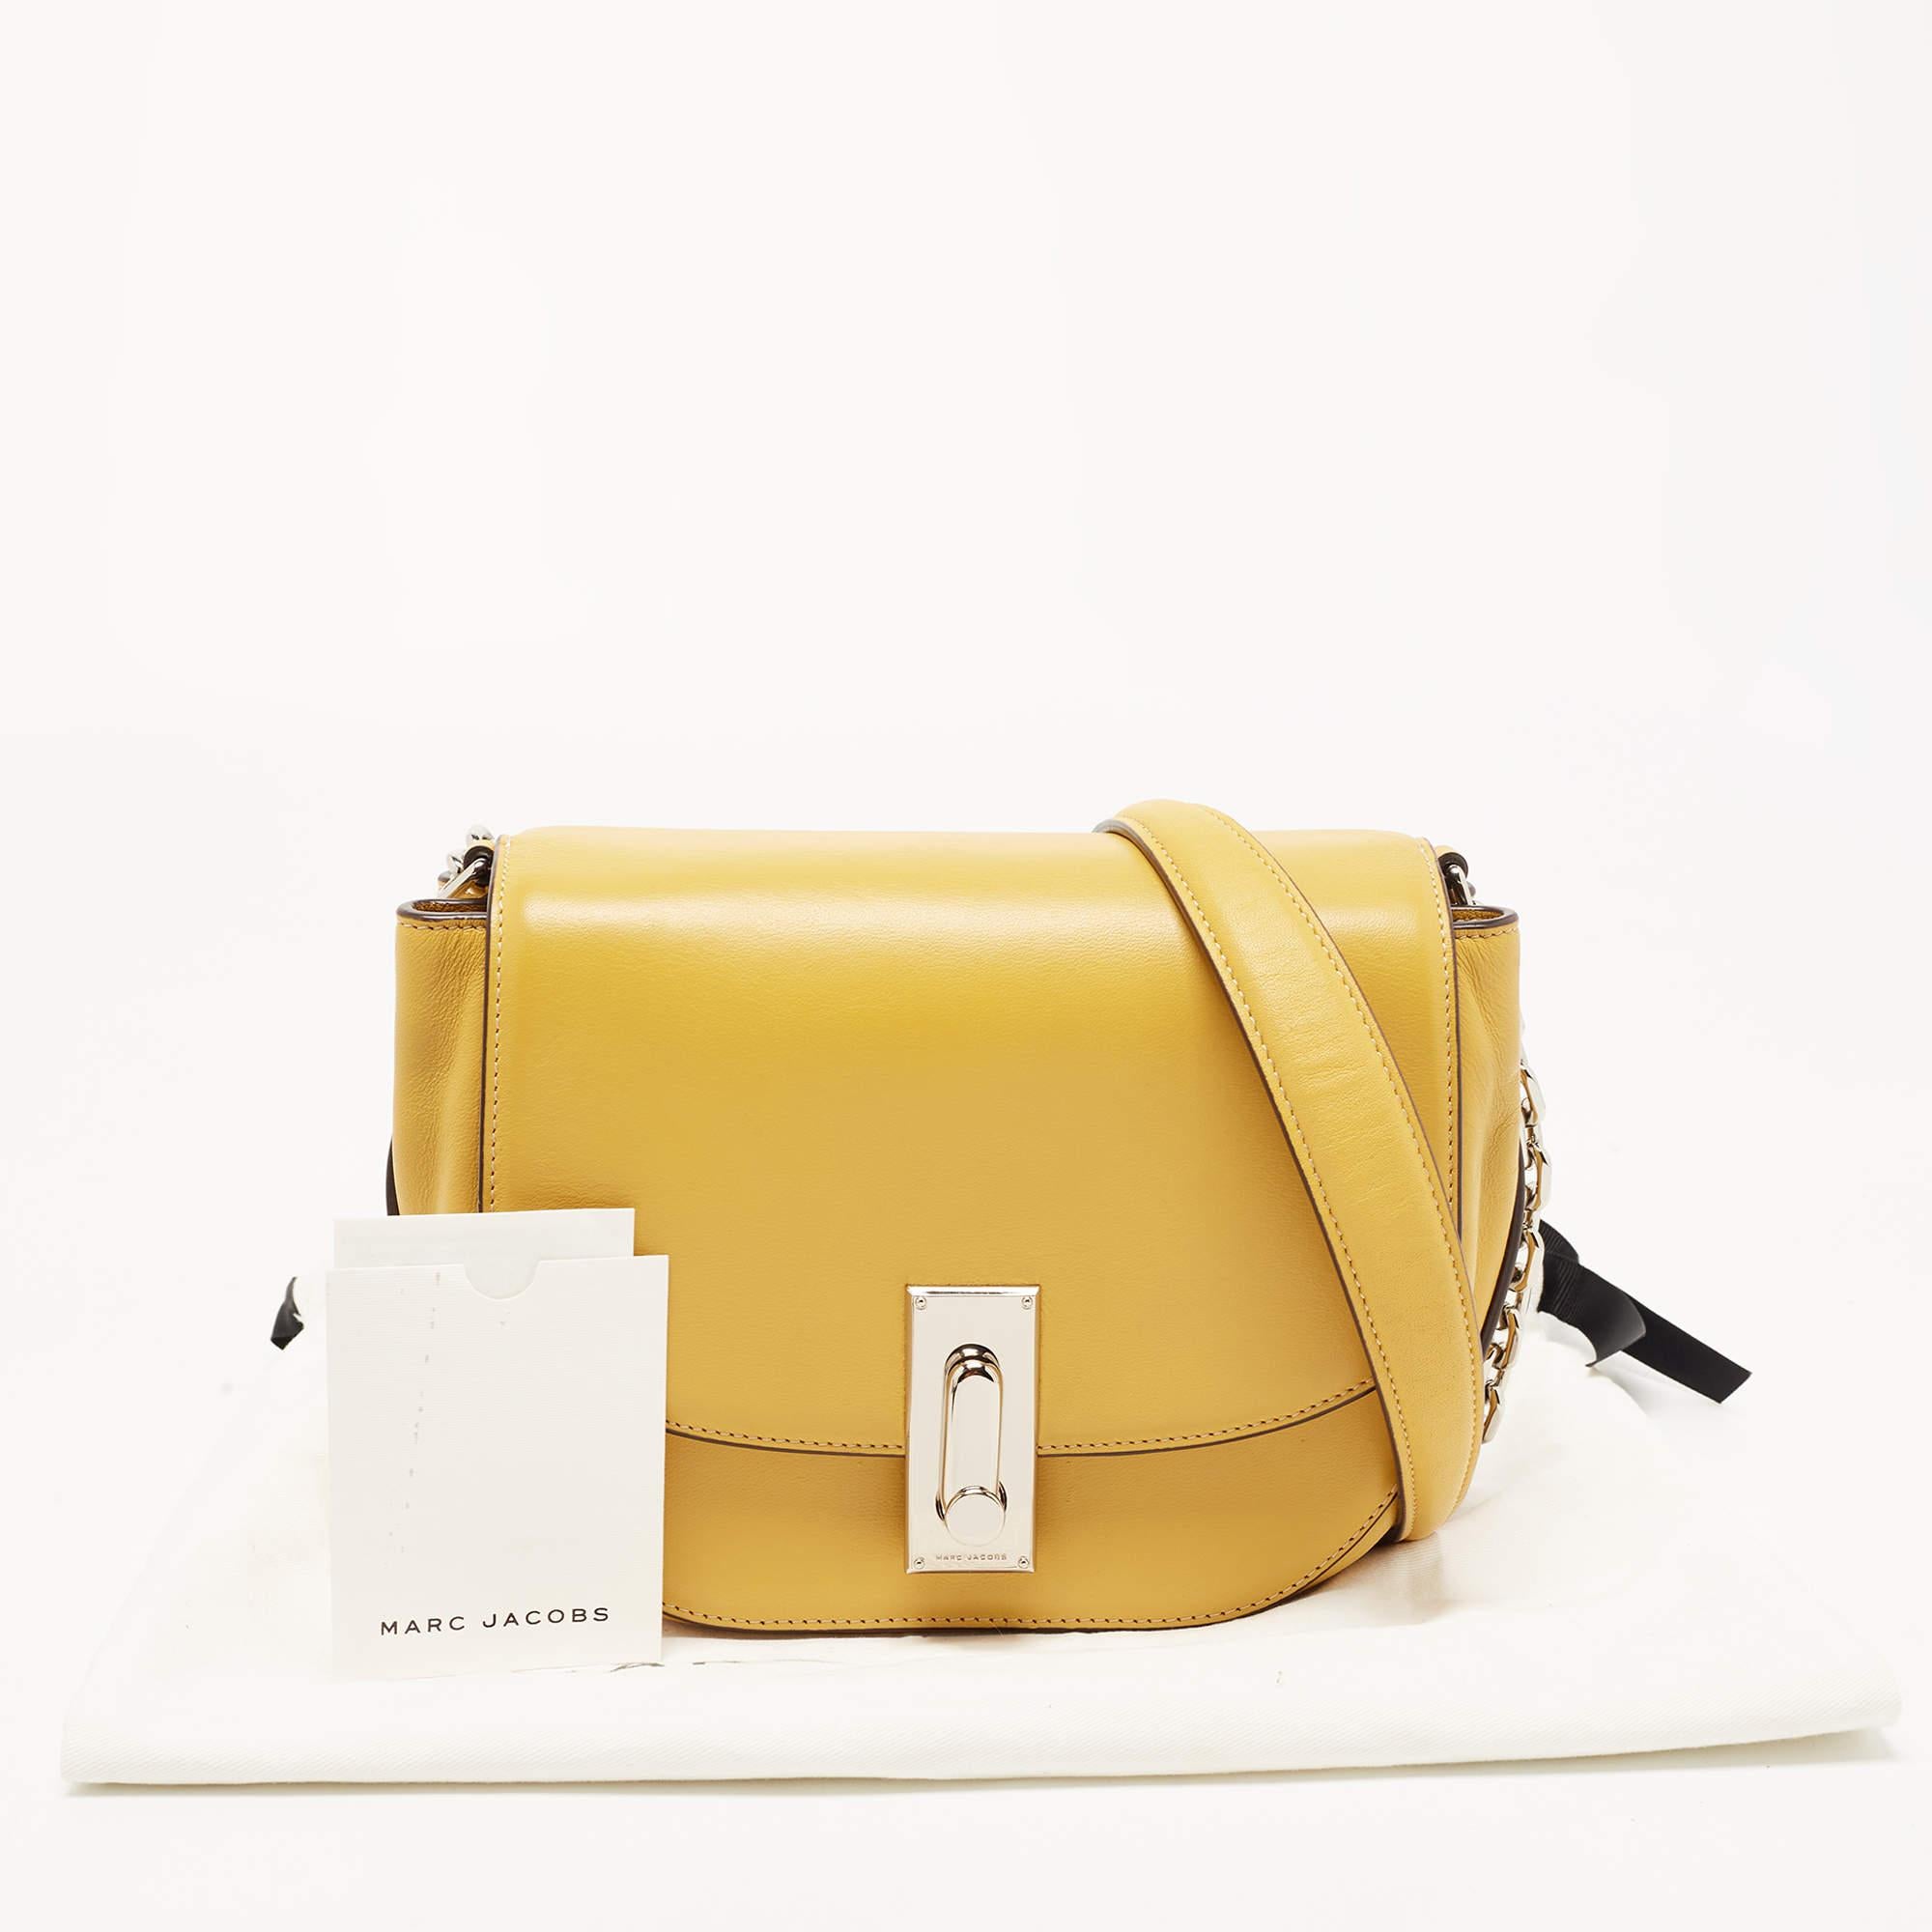 Marc Jacobs Yellow Leather West End The Jane Saddle Shoulder Bag 14